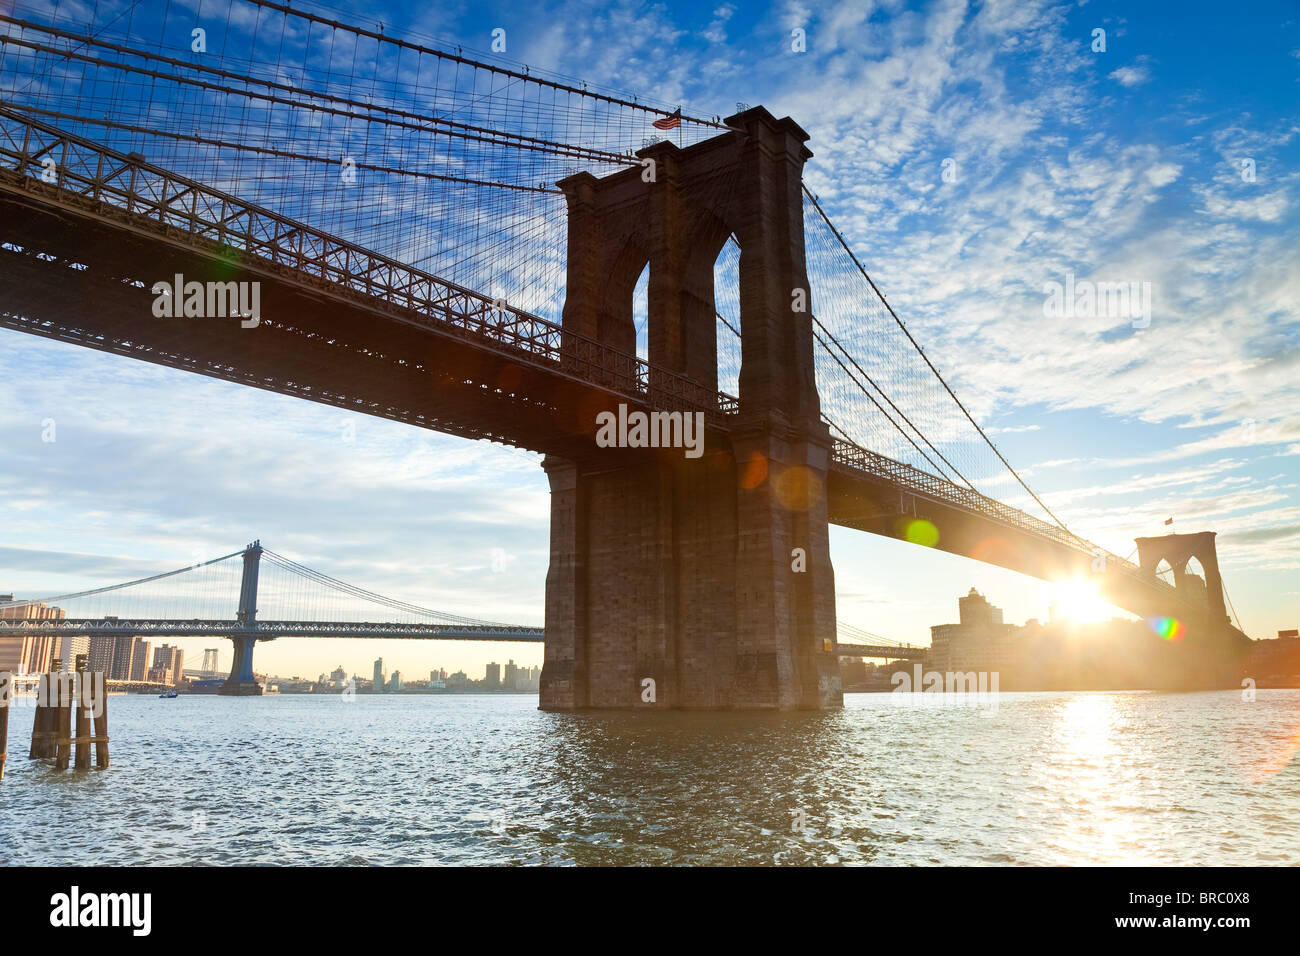 The Brooklyn and Manhattan Bridges spanning the East River, New York City, New York, USA Stock Photo